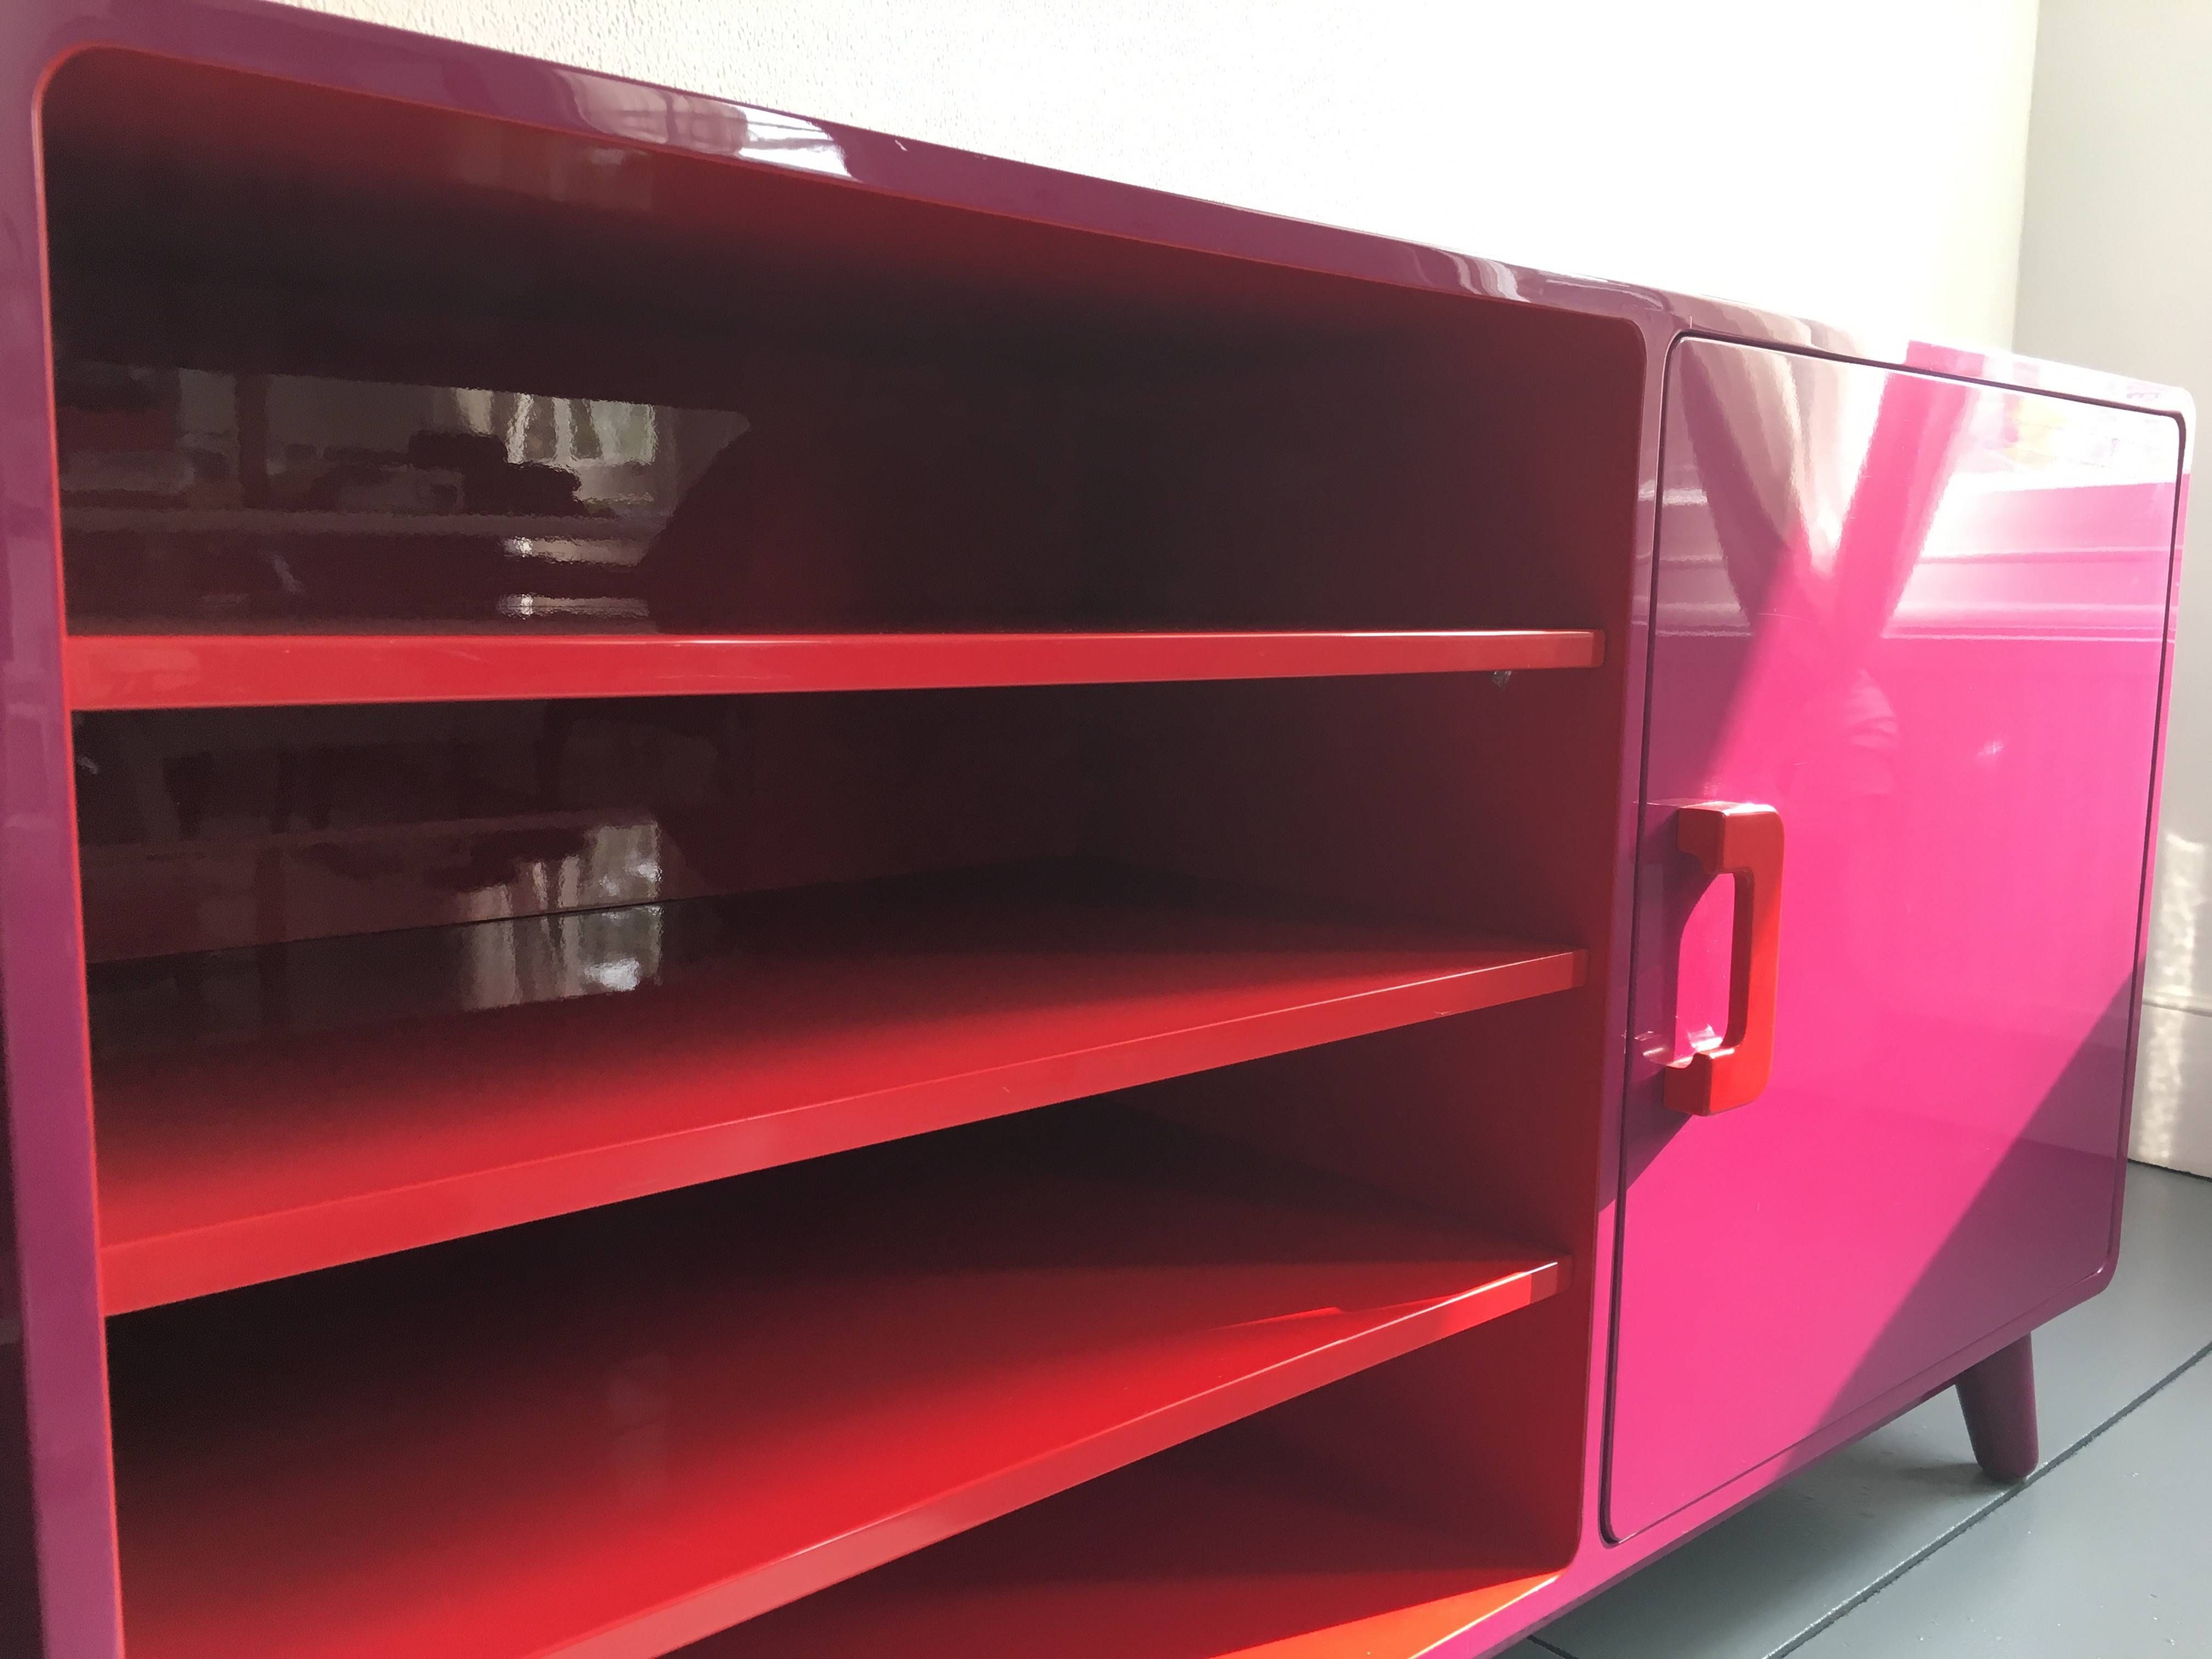 60's Inspired High Gloss Lacquered Sideboard In Hot Pink And Red Regarding Red High Gloss Sideboards (View 10 of 15)